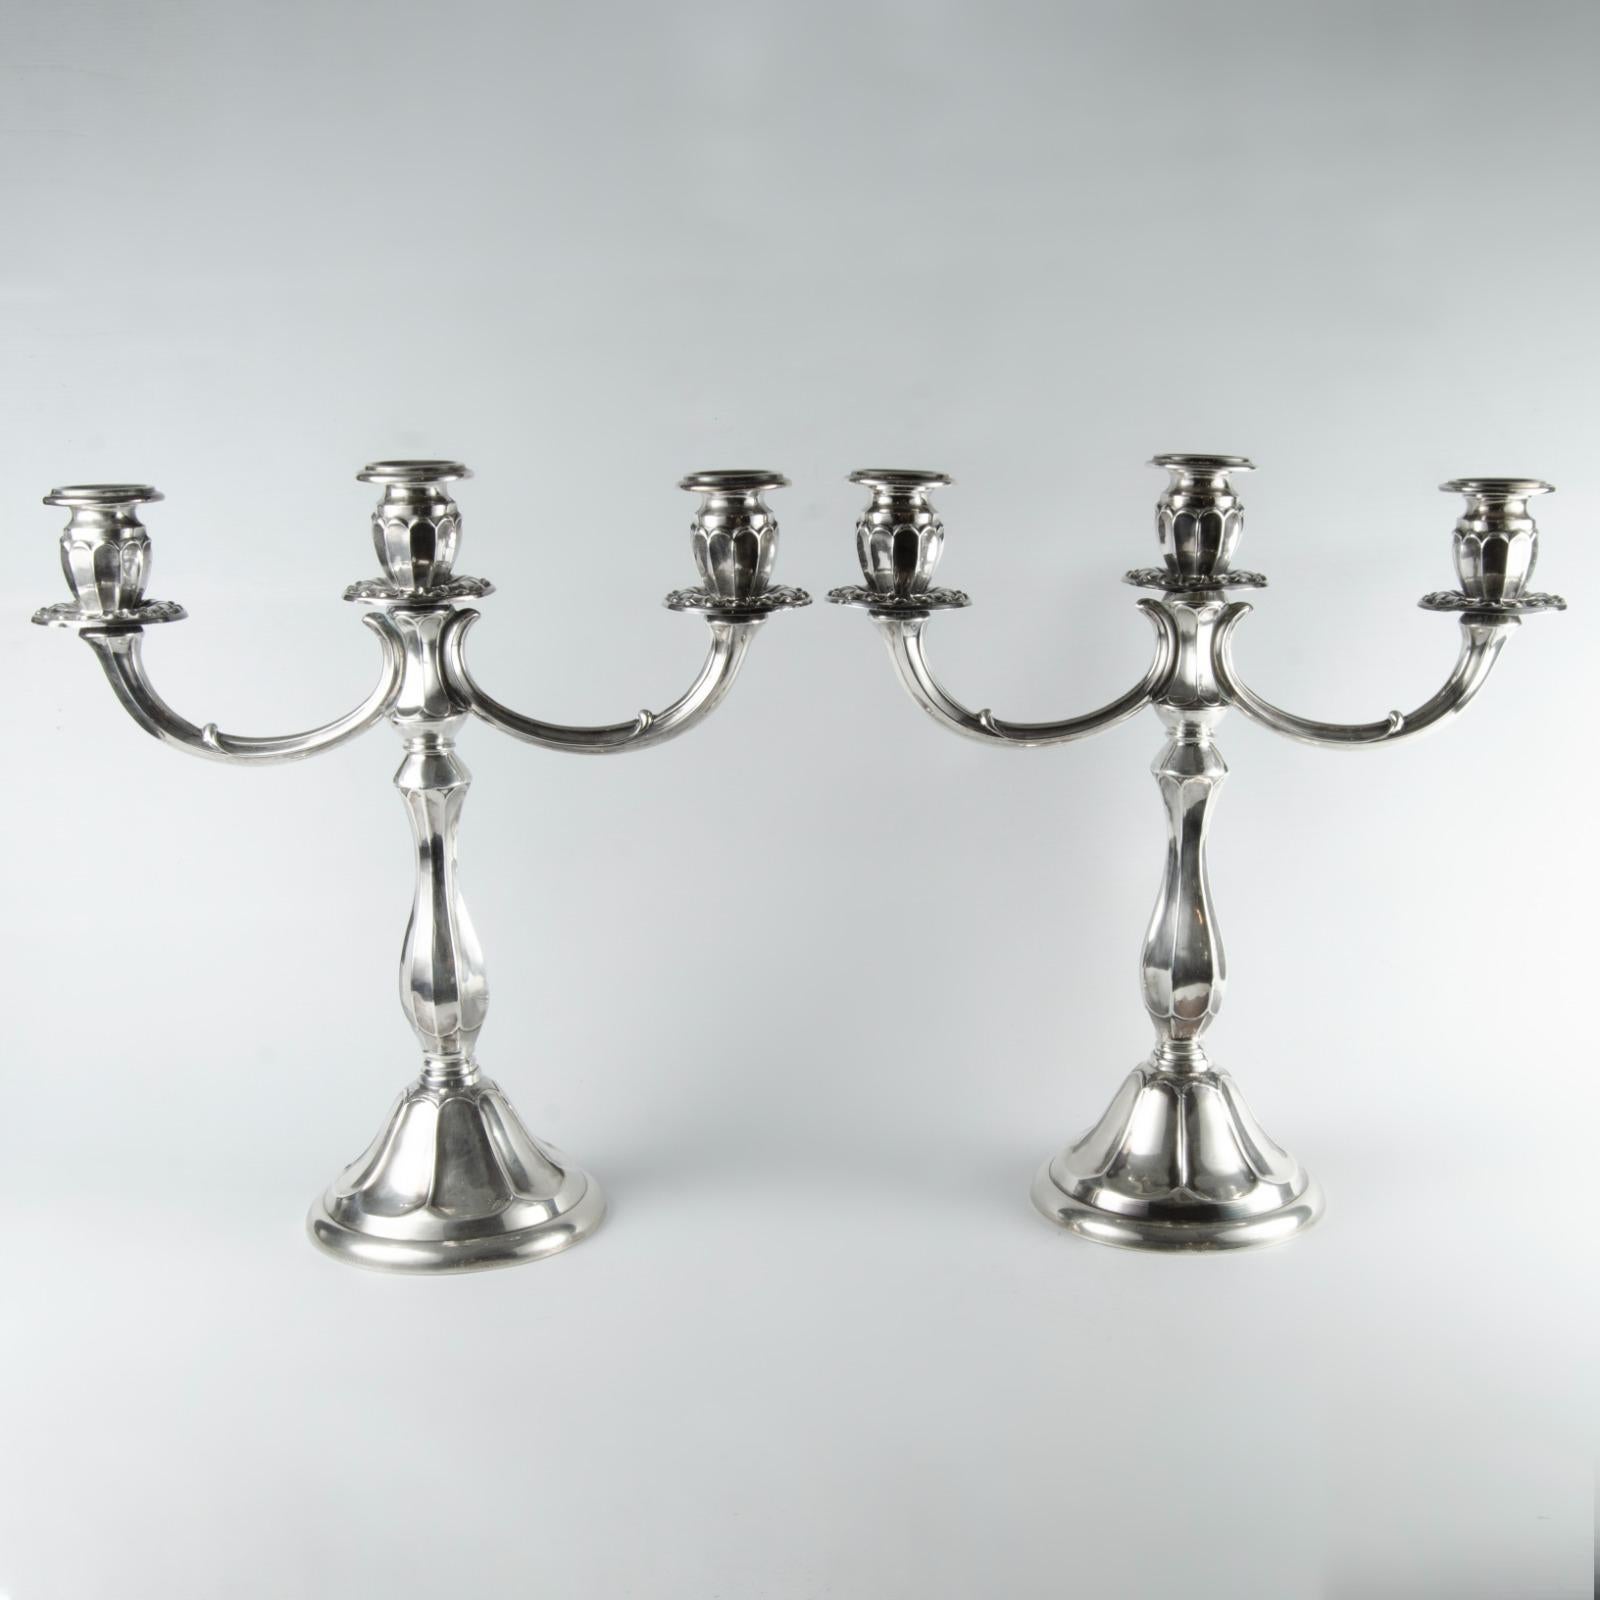 Art Deco 925 Sterling Silver Candle Holders
Pair of silver candelabras with an elegant design. Each has a round base and a slender stem that widens toward the center, with arms that extend in graceful curves holding three candle holders. The